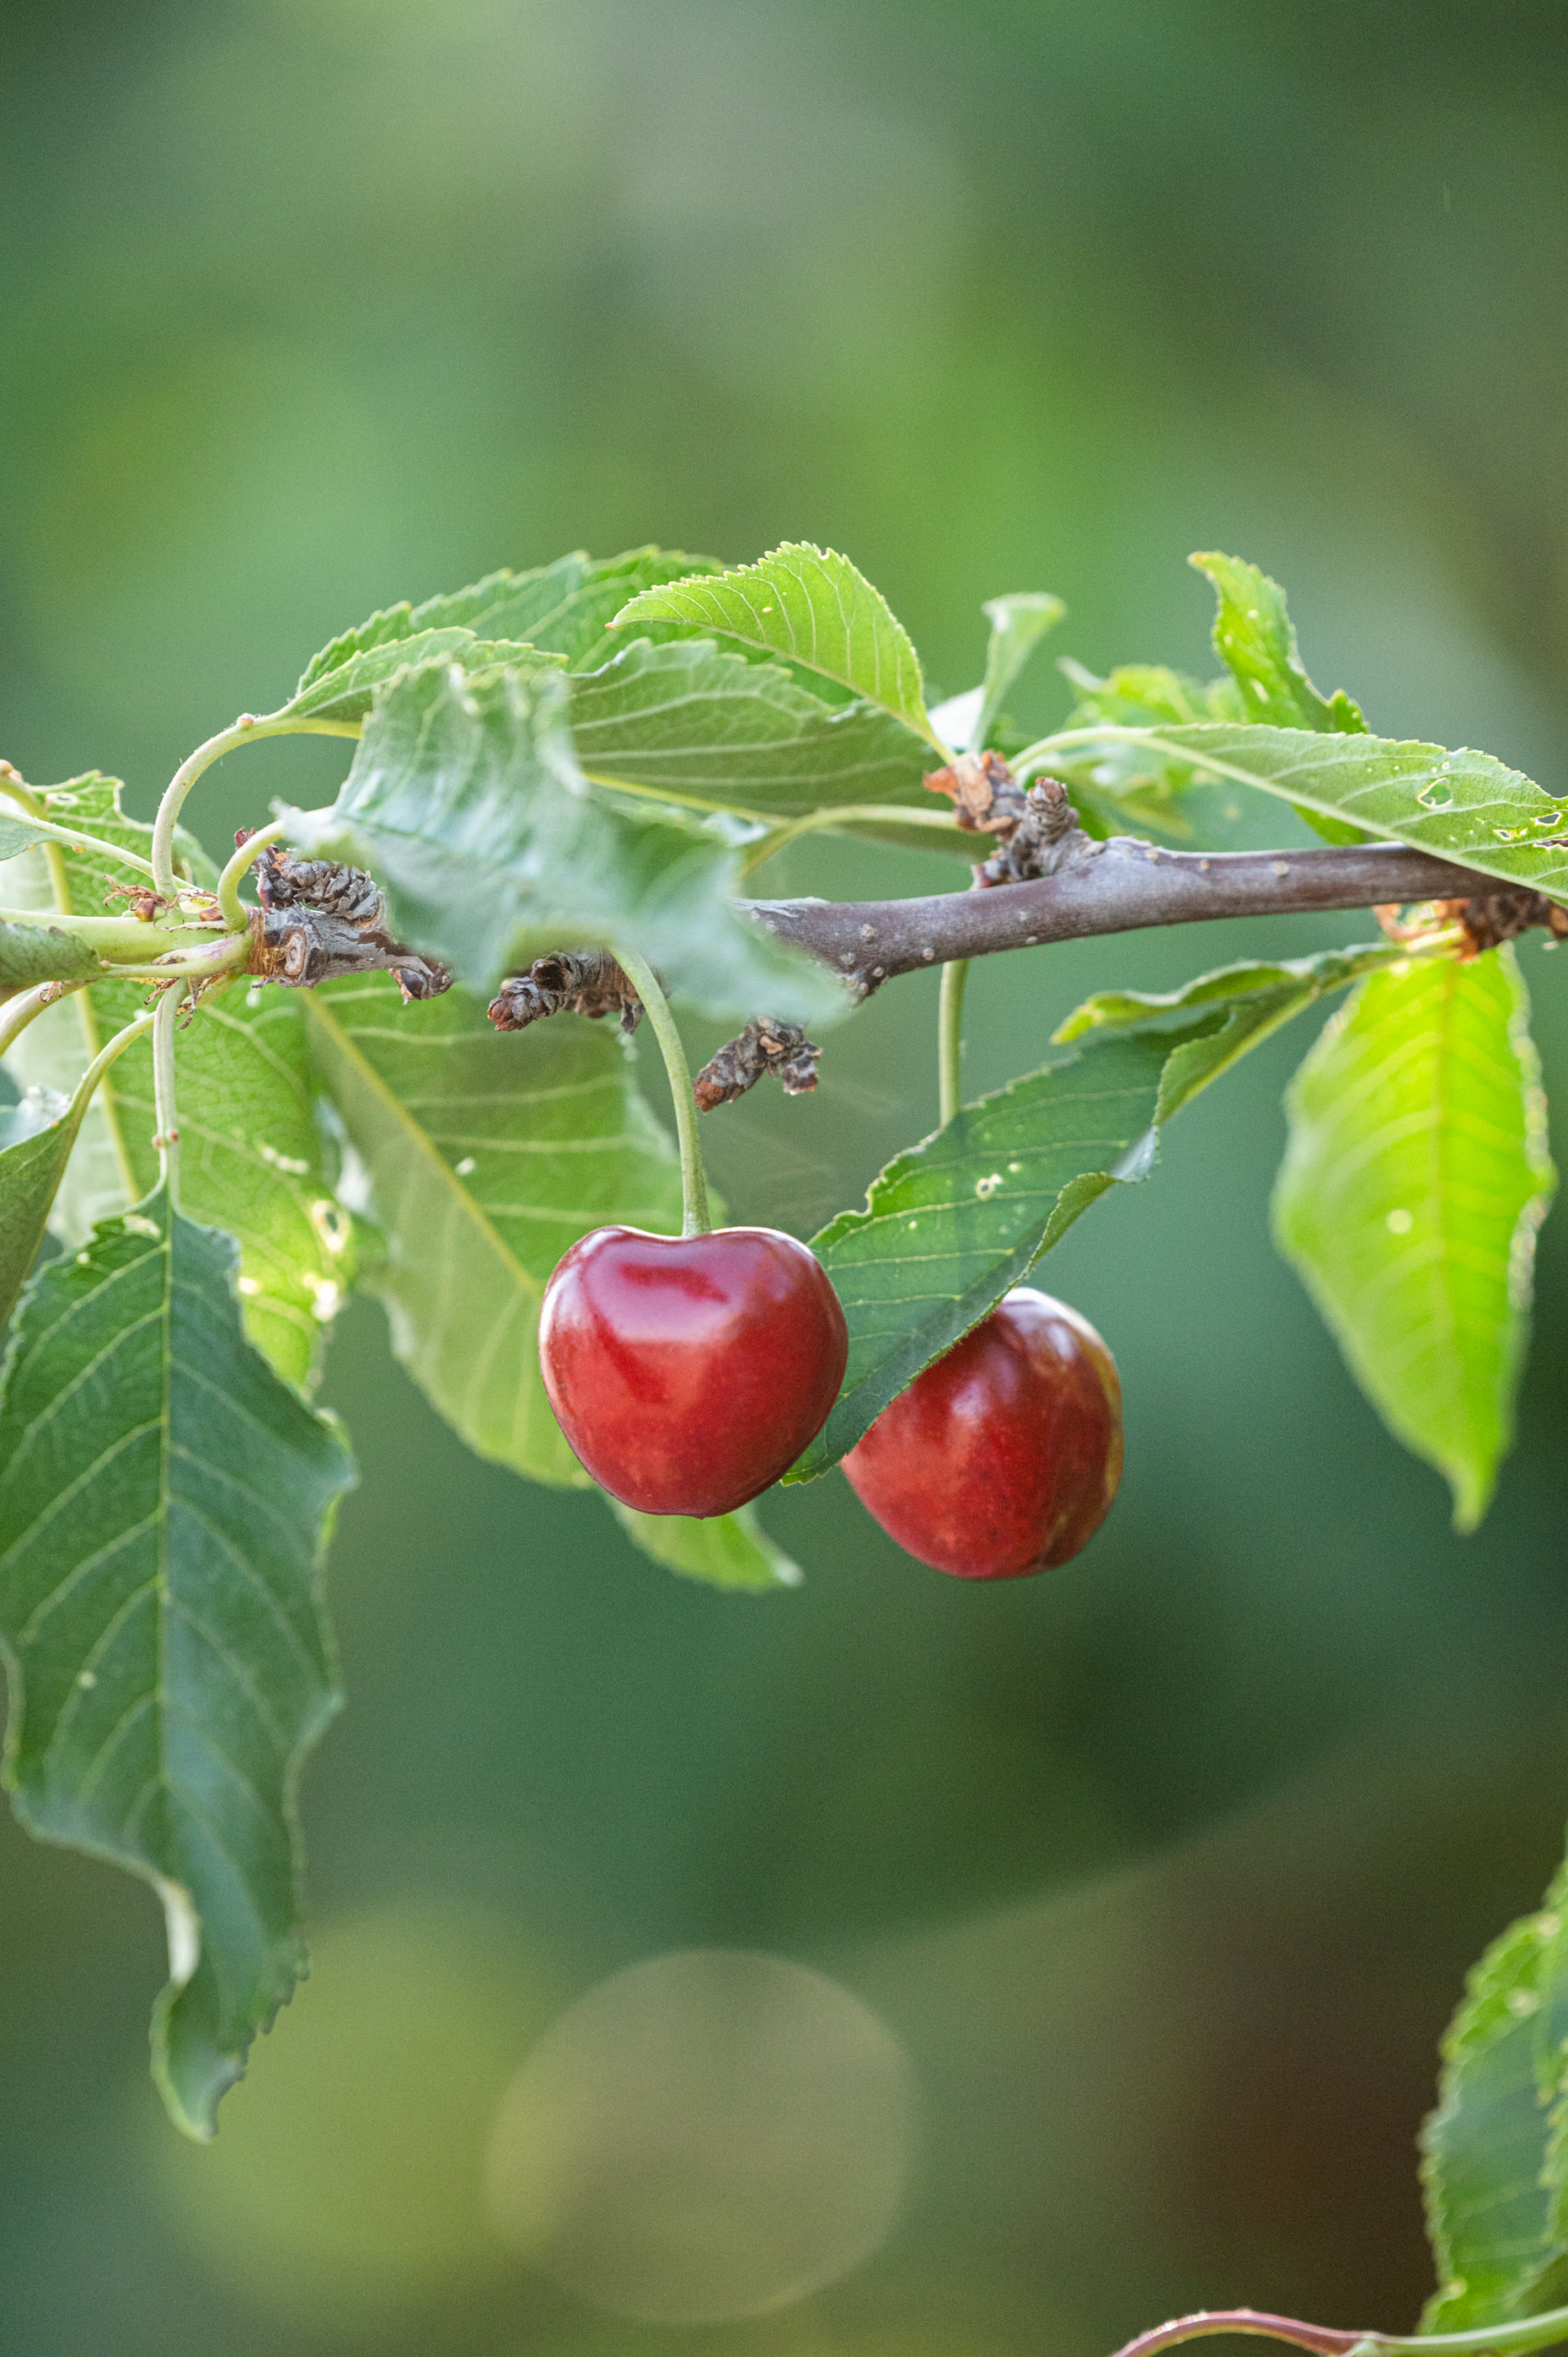 Two cherries growing in Central California